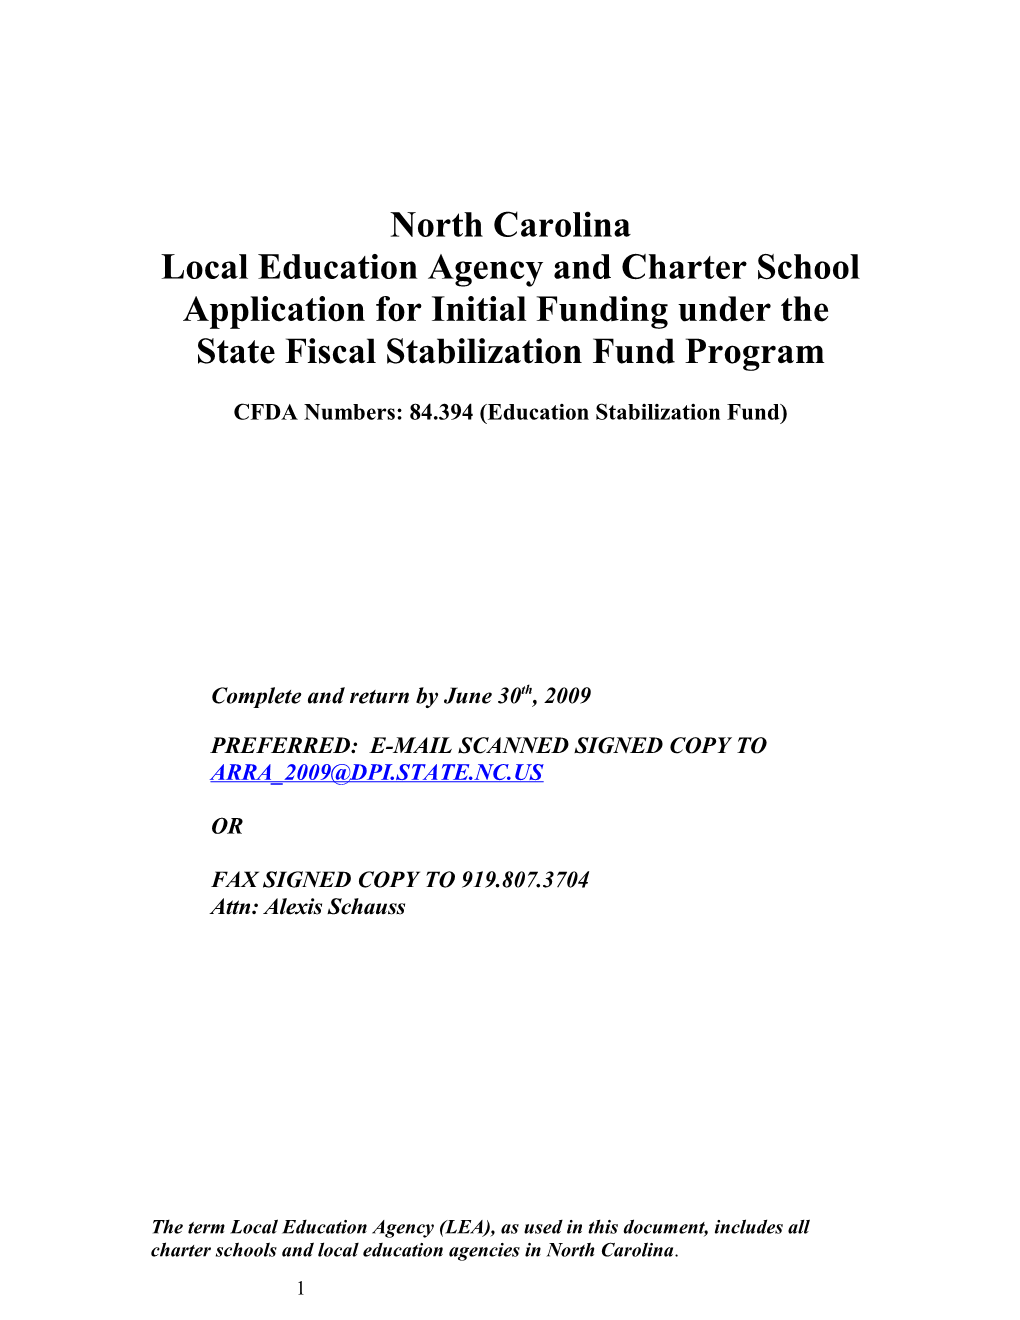 State Fiscal Stabilization Fund - Application and Assurances